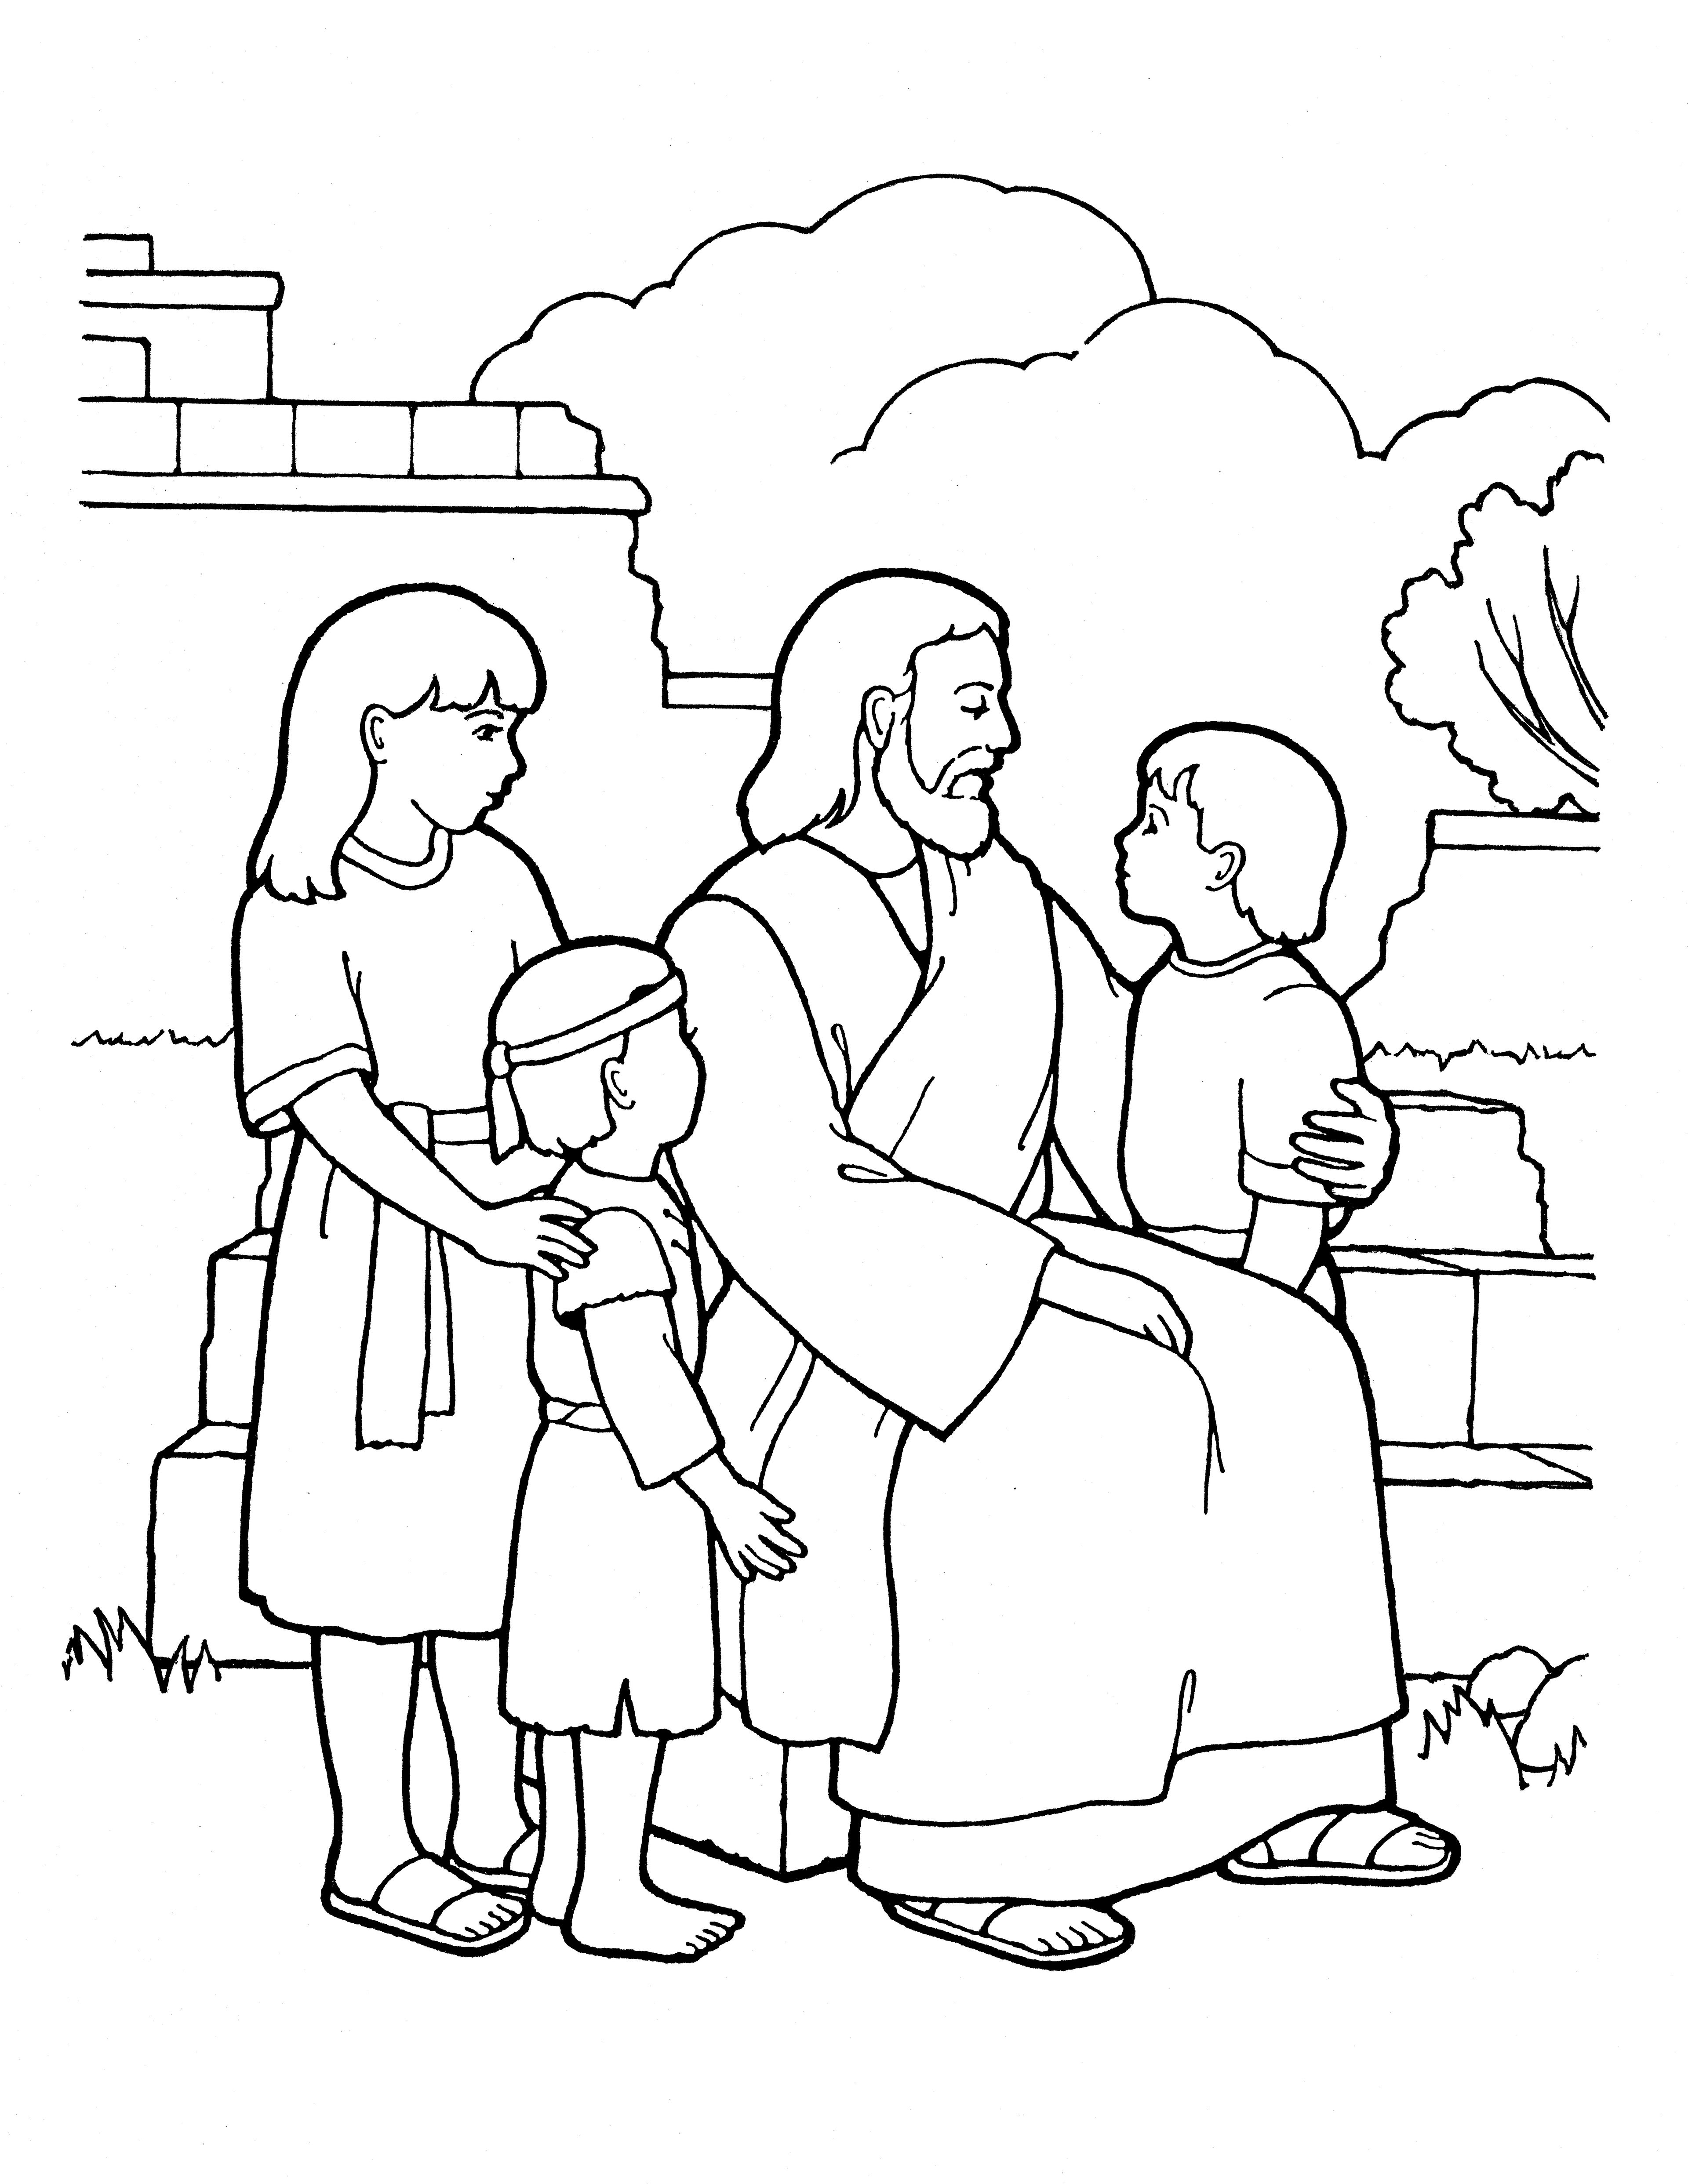 An illustration of Christ blessing the children, from the nursery manual Behold Your Little Ones (2008), page 95.